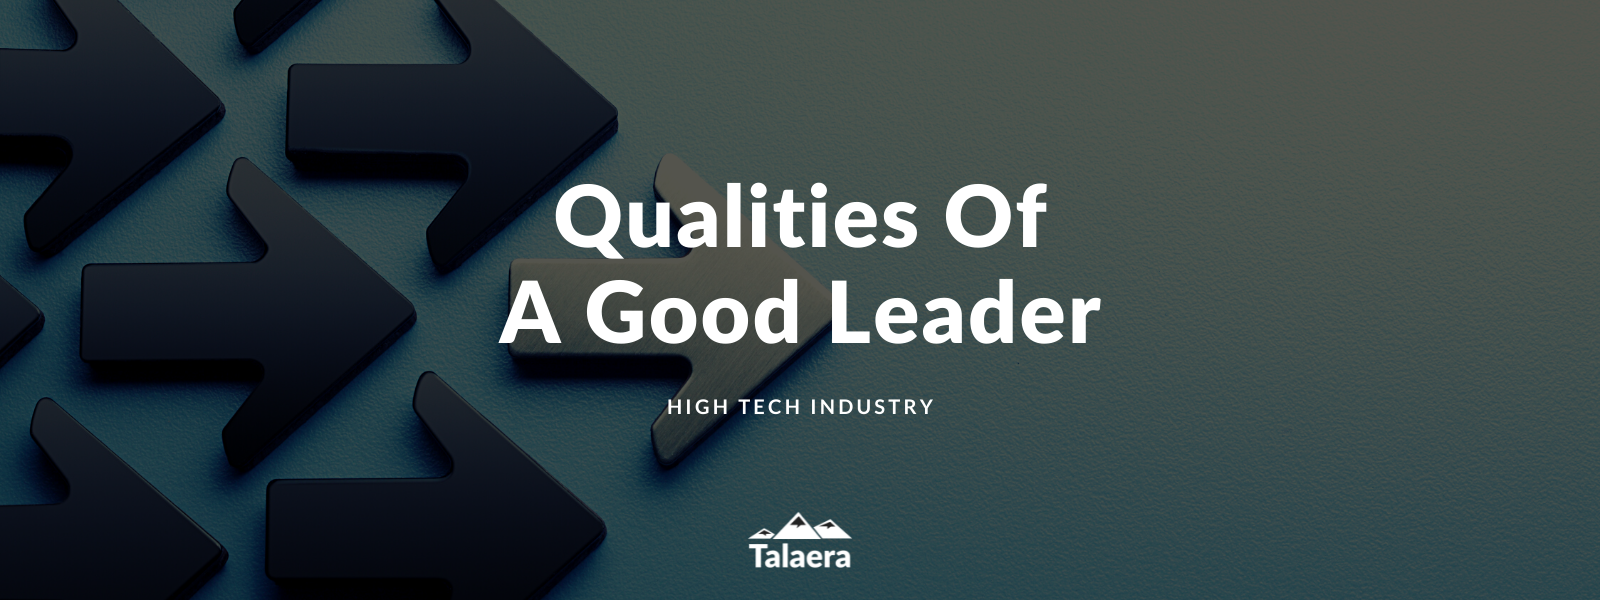 9 Qualities Of A Good Leader In Today’s High Tech Industry